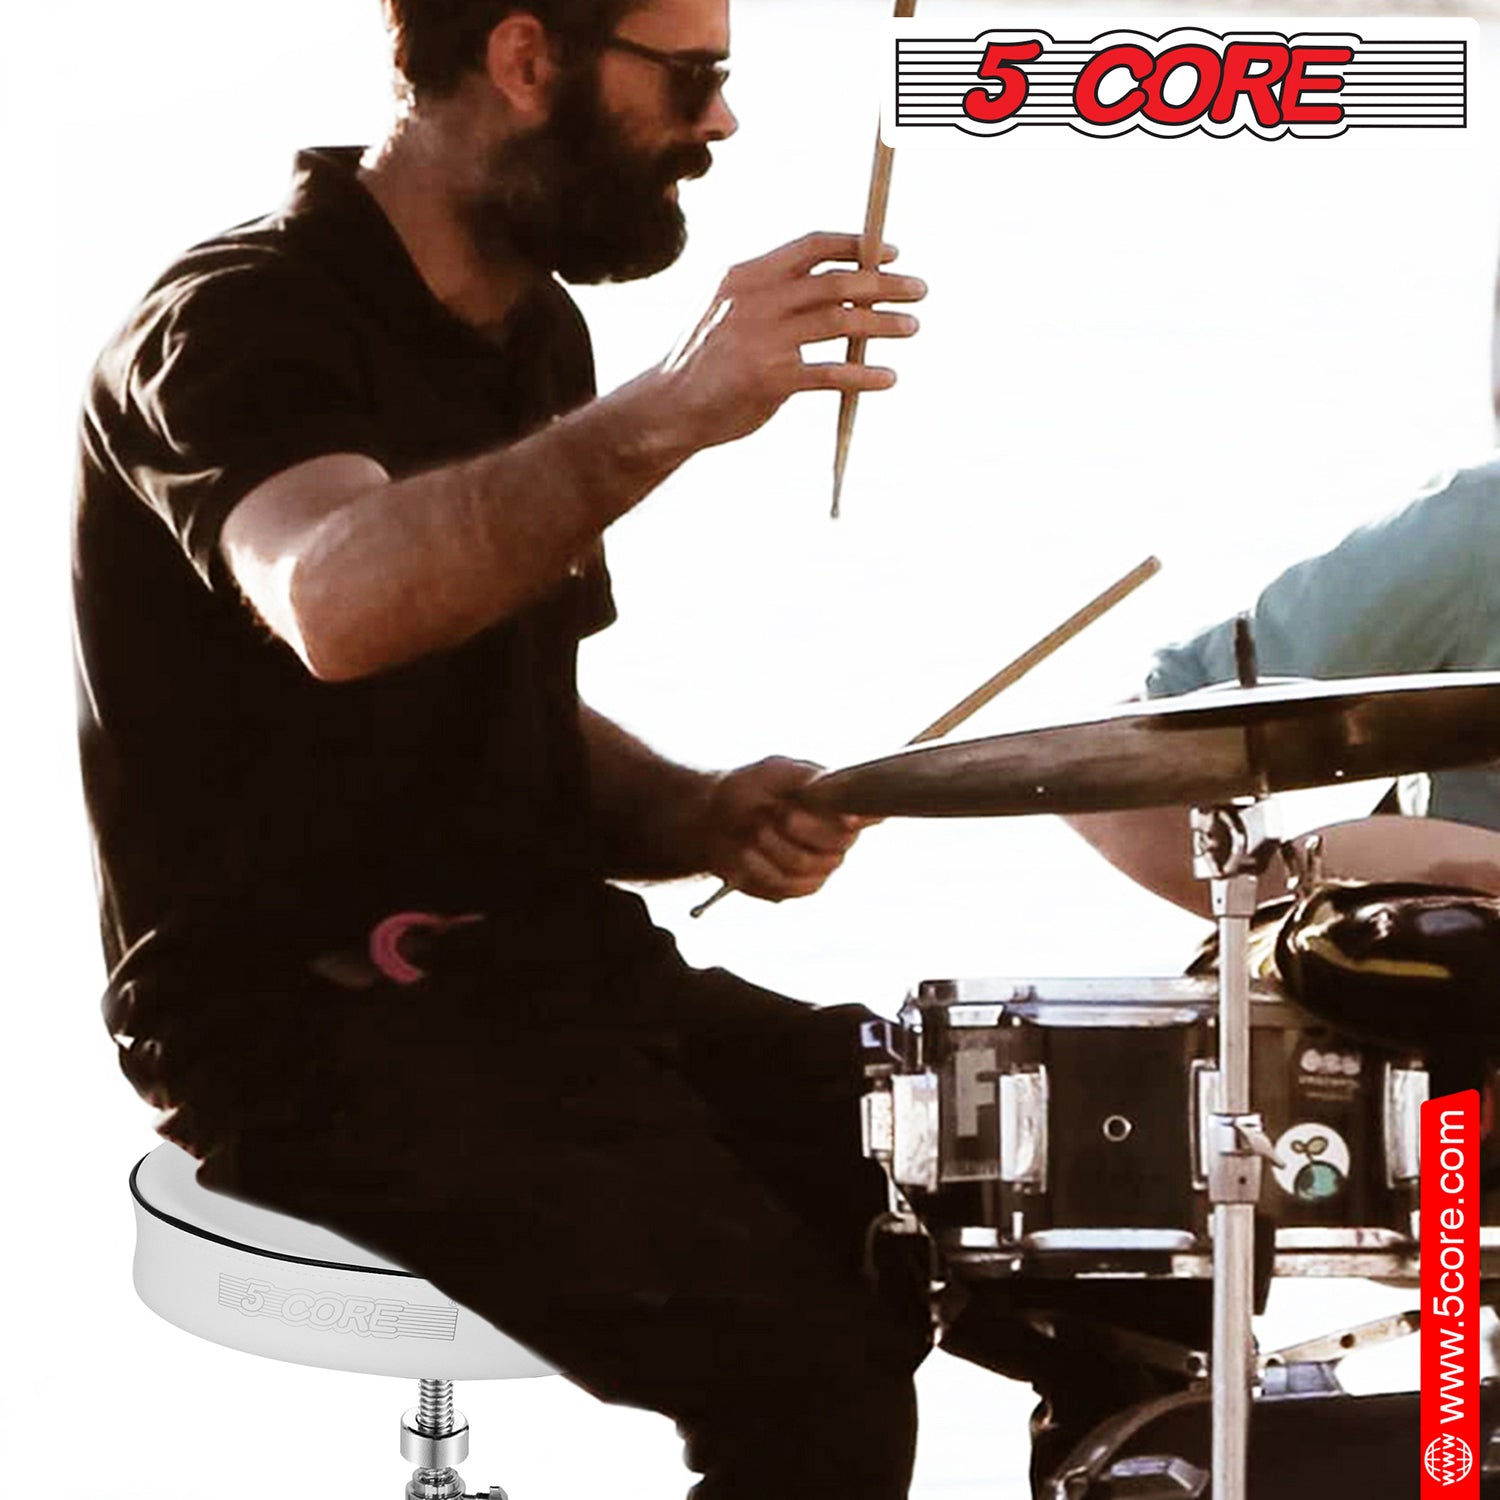 5 Core Drumming Stool: Comfortable, height adjustable seat for drummers and percussionists.